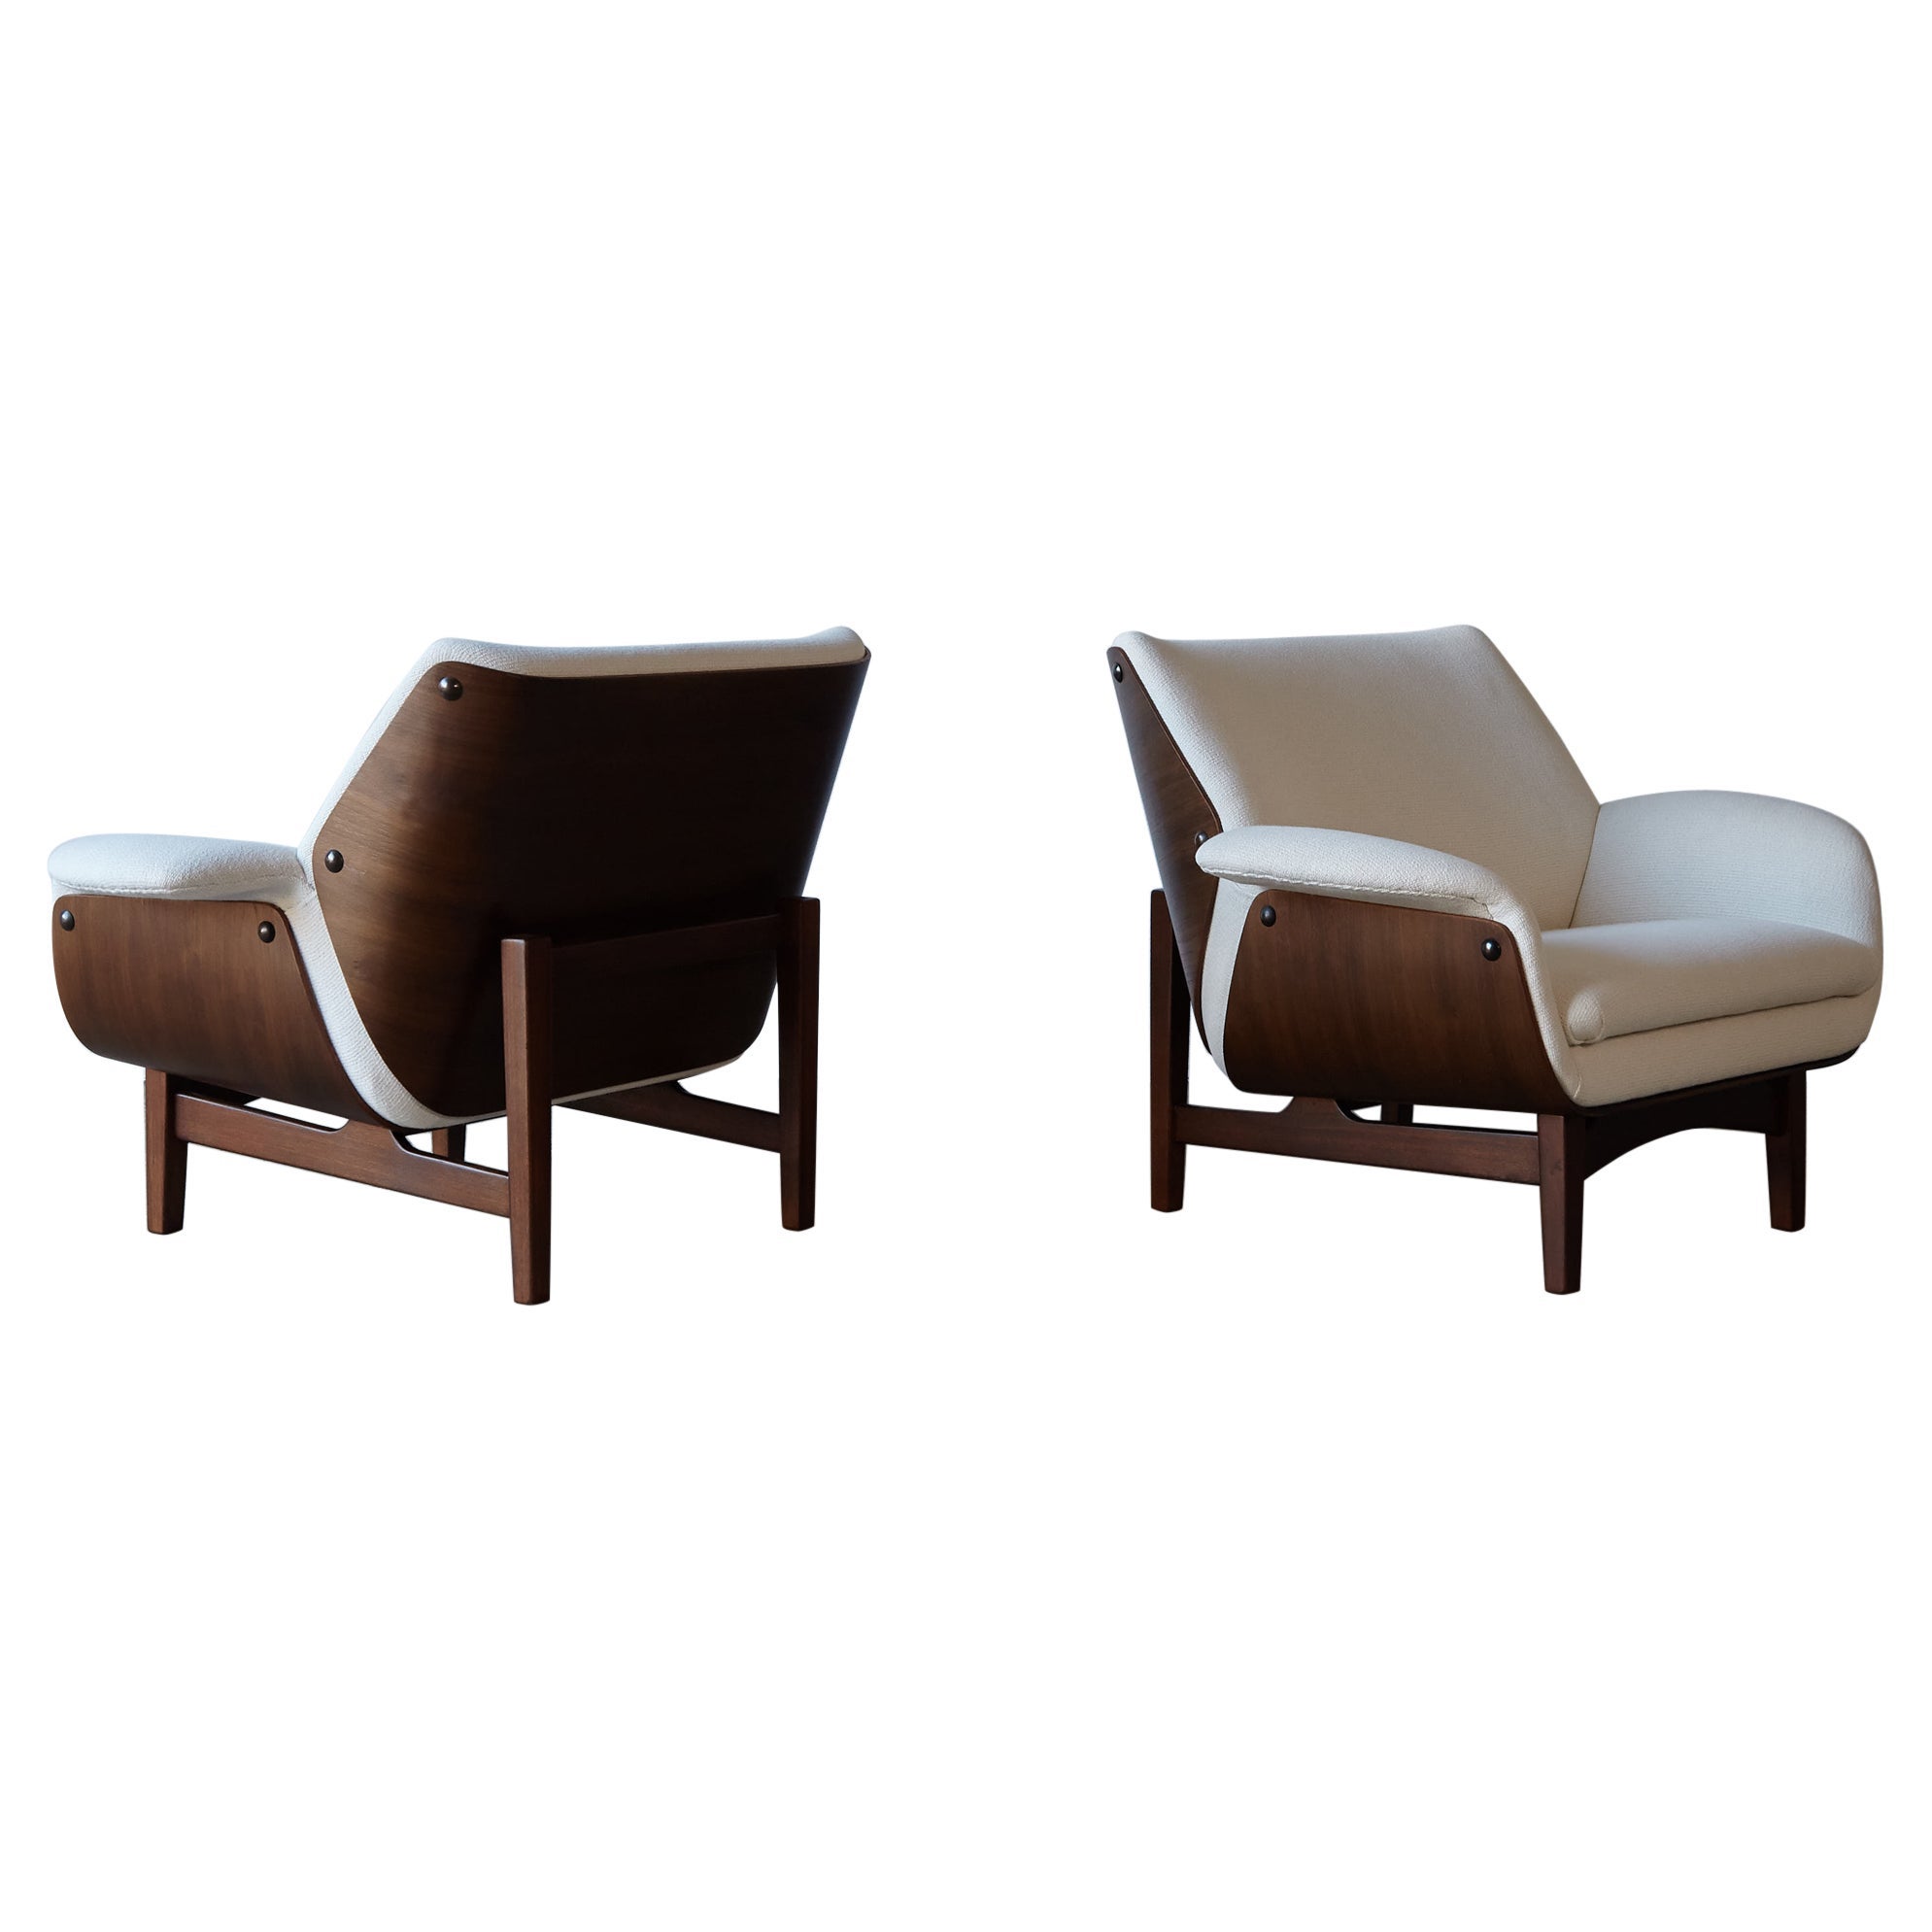 Rare Pair of Chairs, by Charles F Joosten for Interstyle, Italy, 1960s